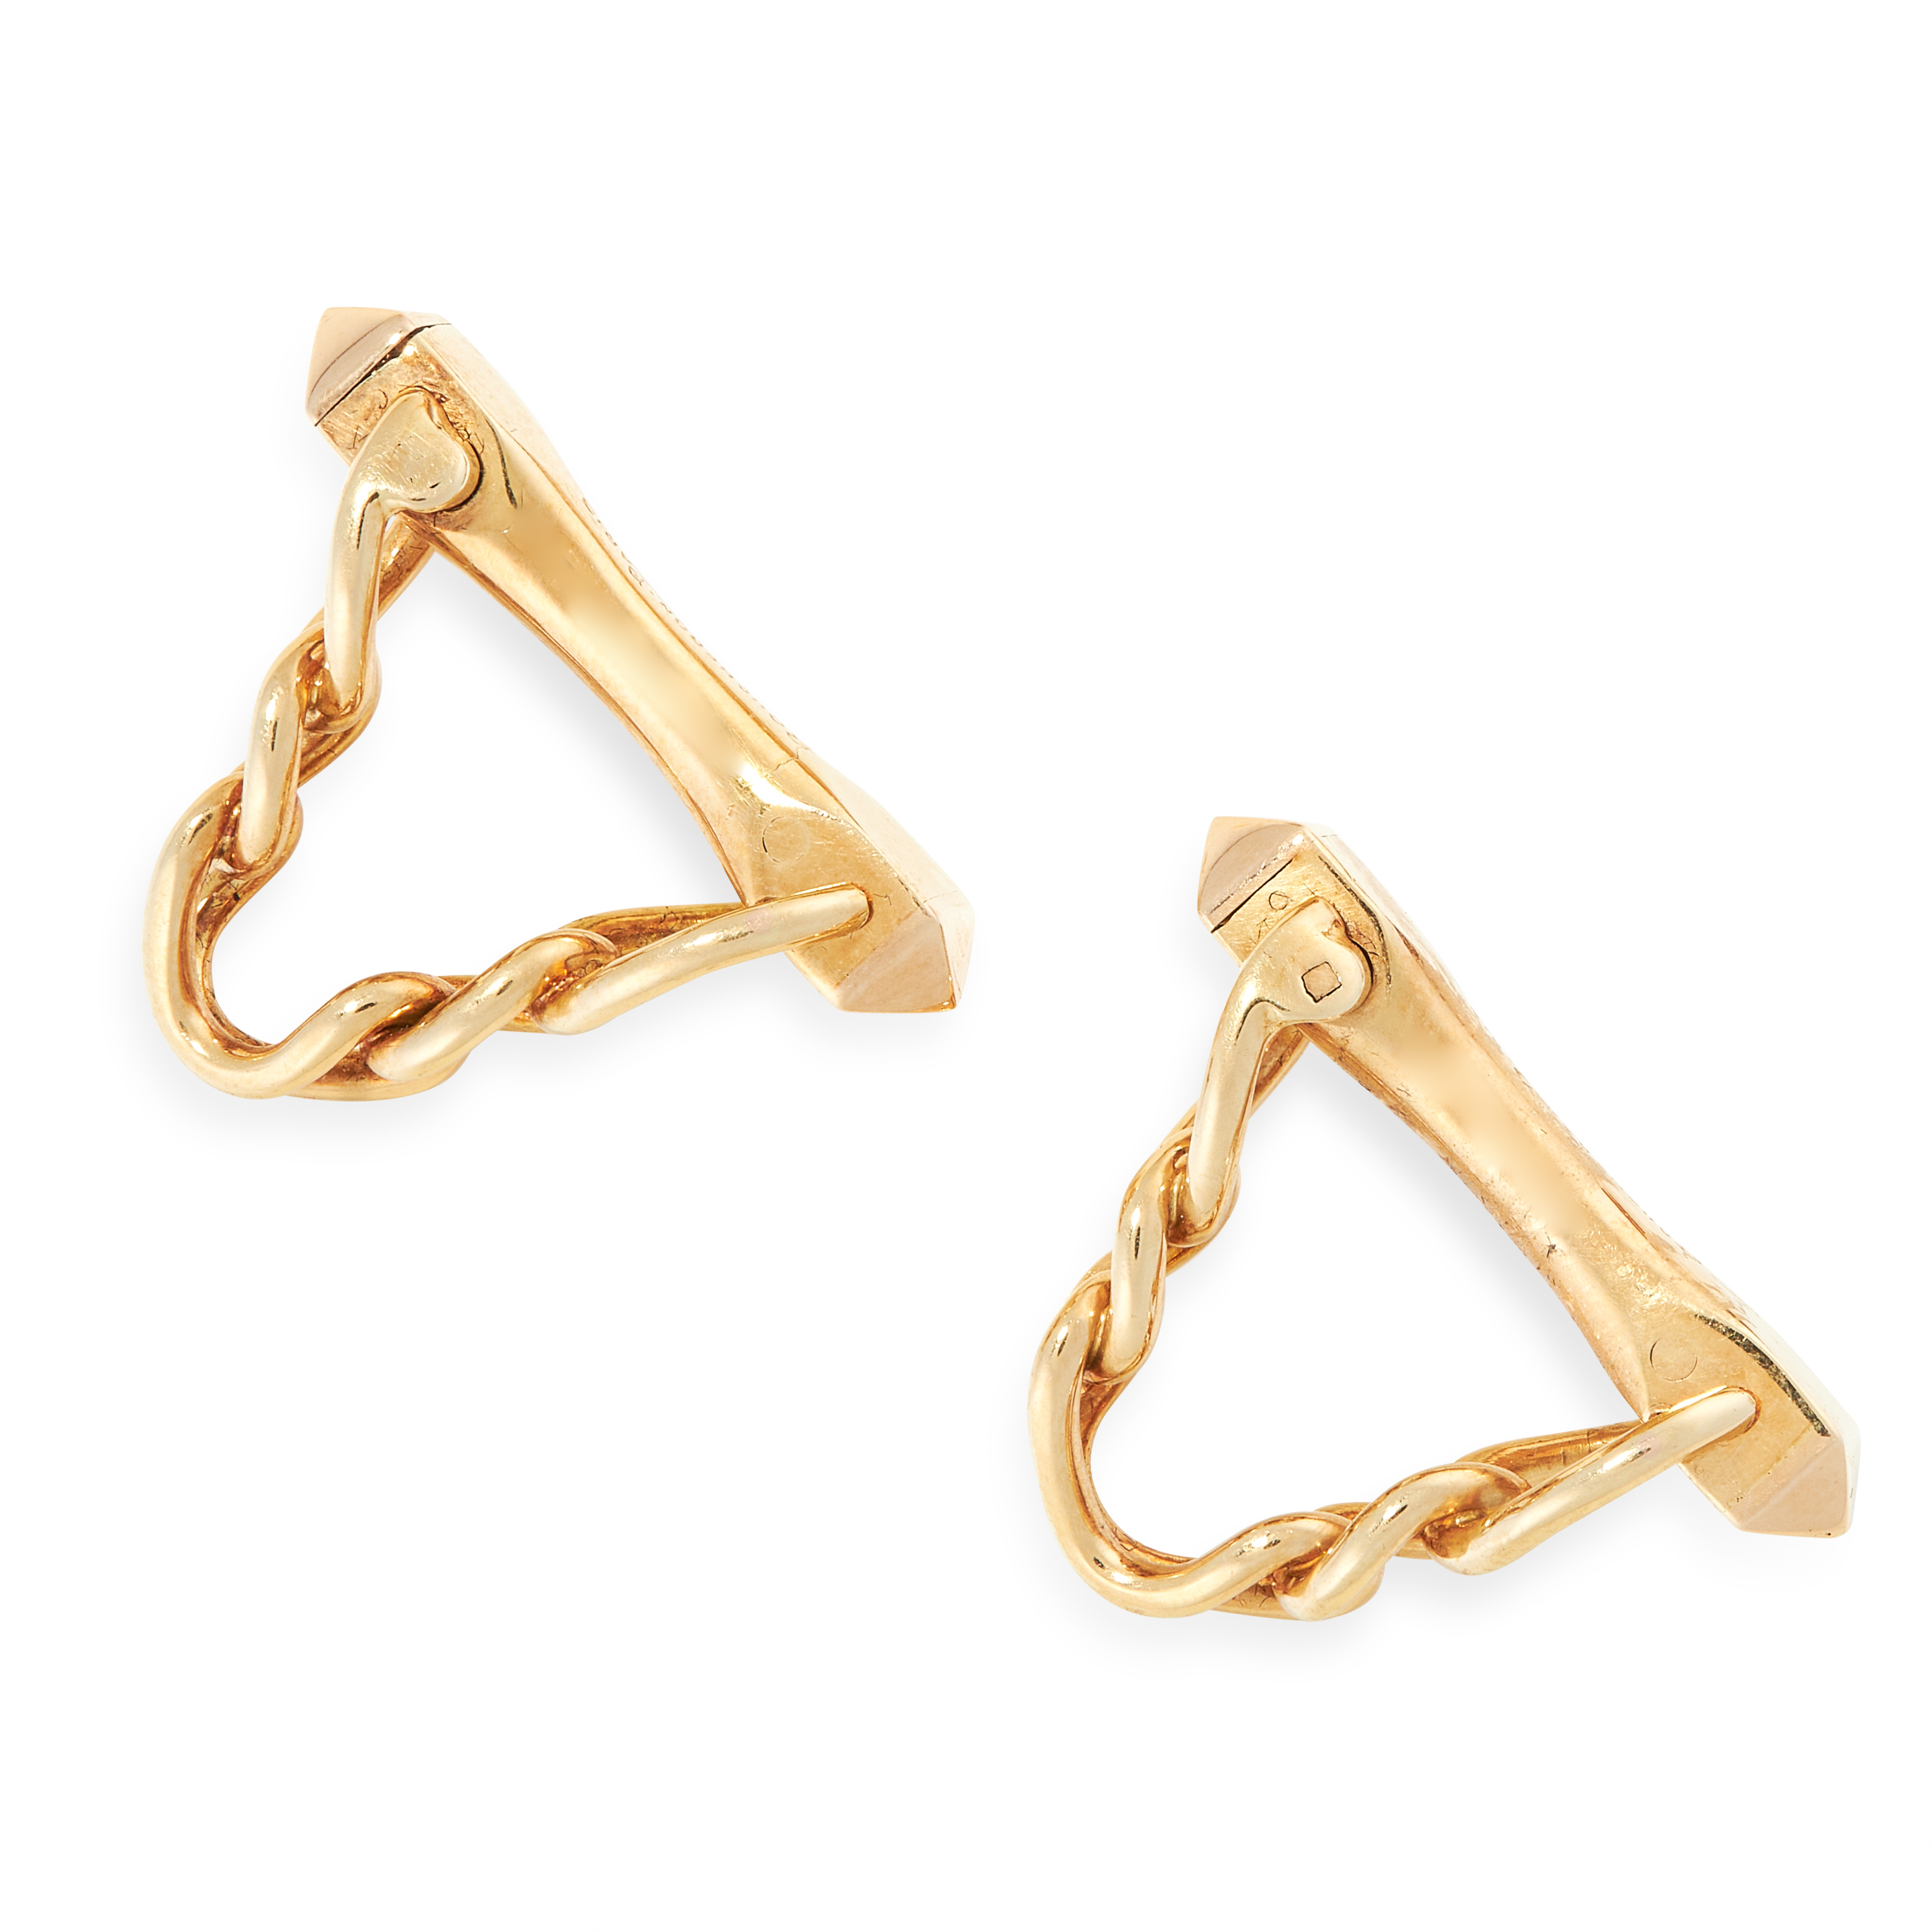 A PAIR OF VINTAGE CUFFLINKS, BOUCHERON in 18ct yellow gold, each designed as a stirrup formed of - Image 2 of 3